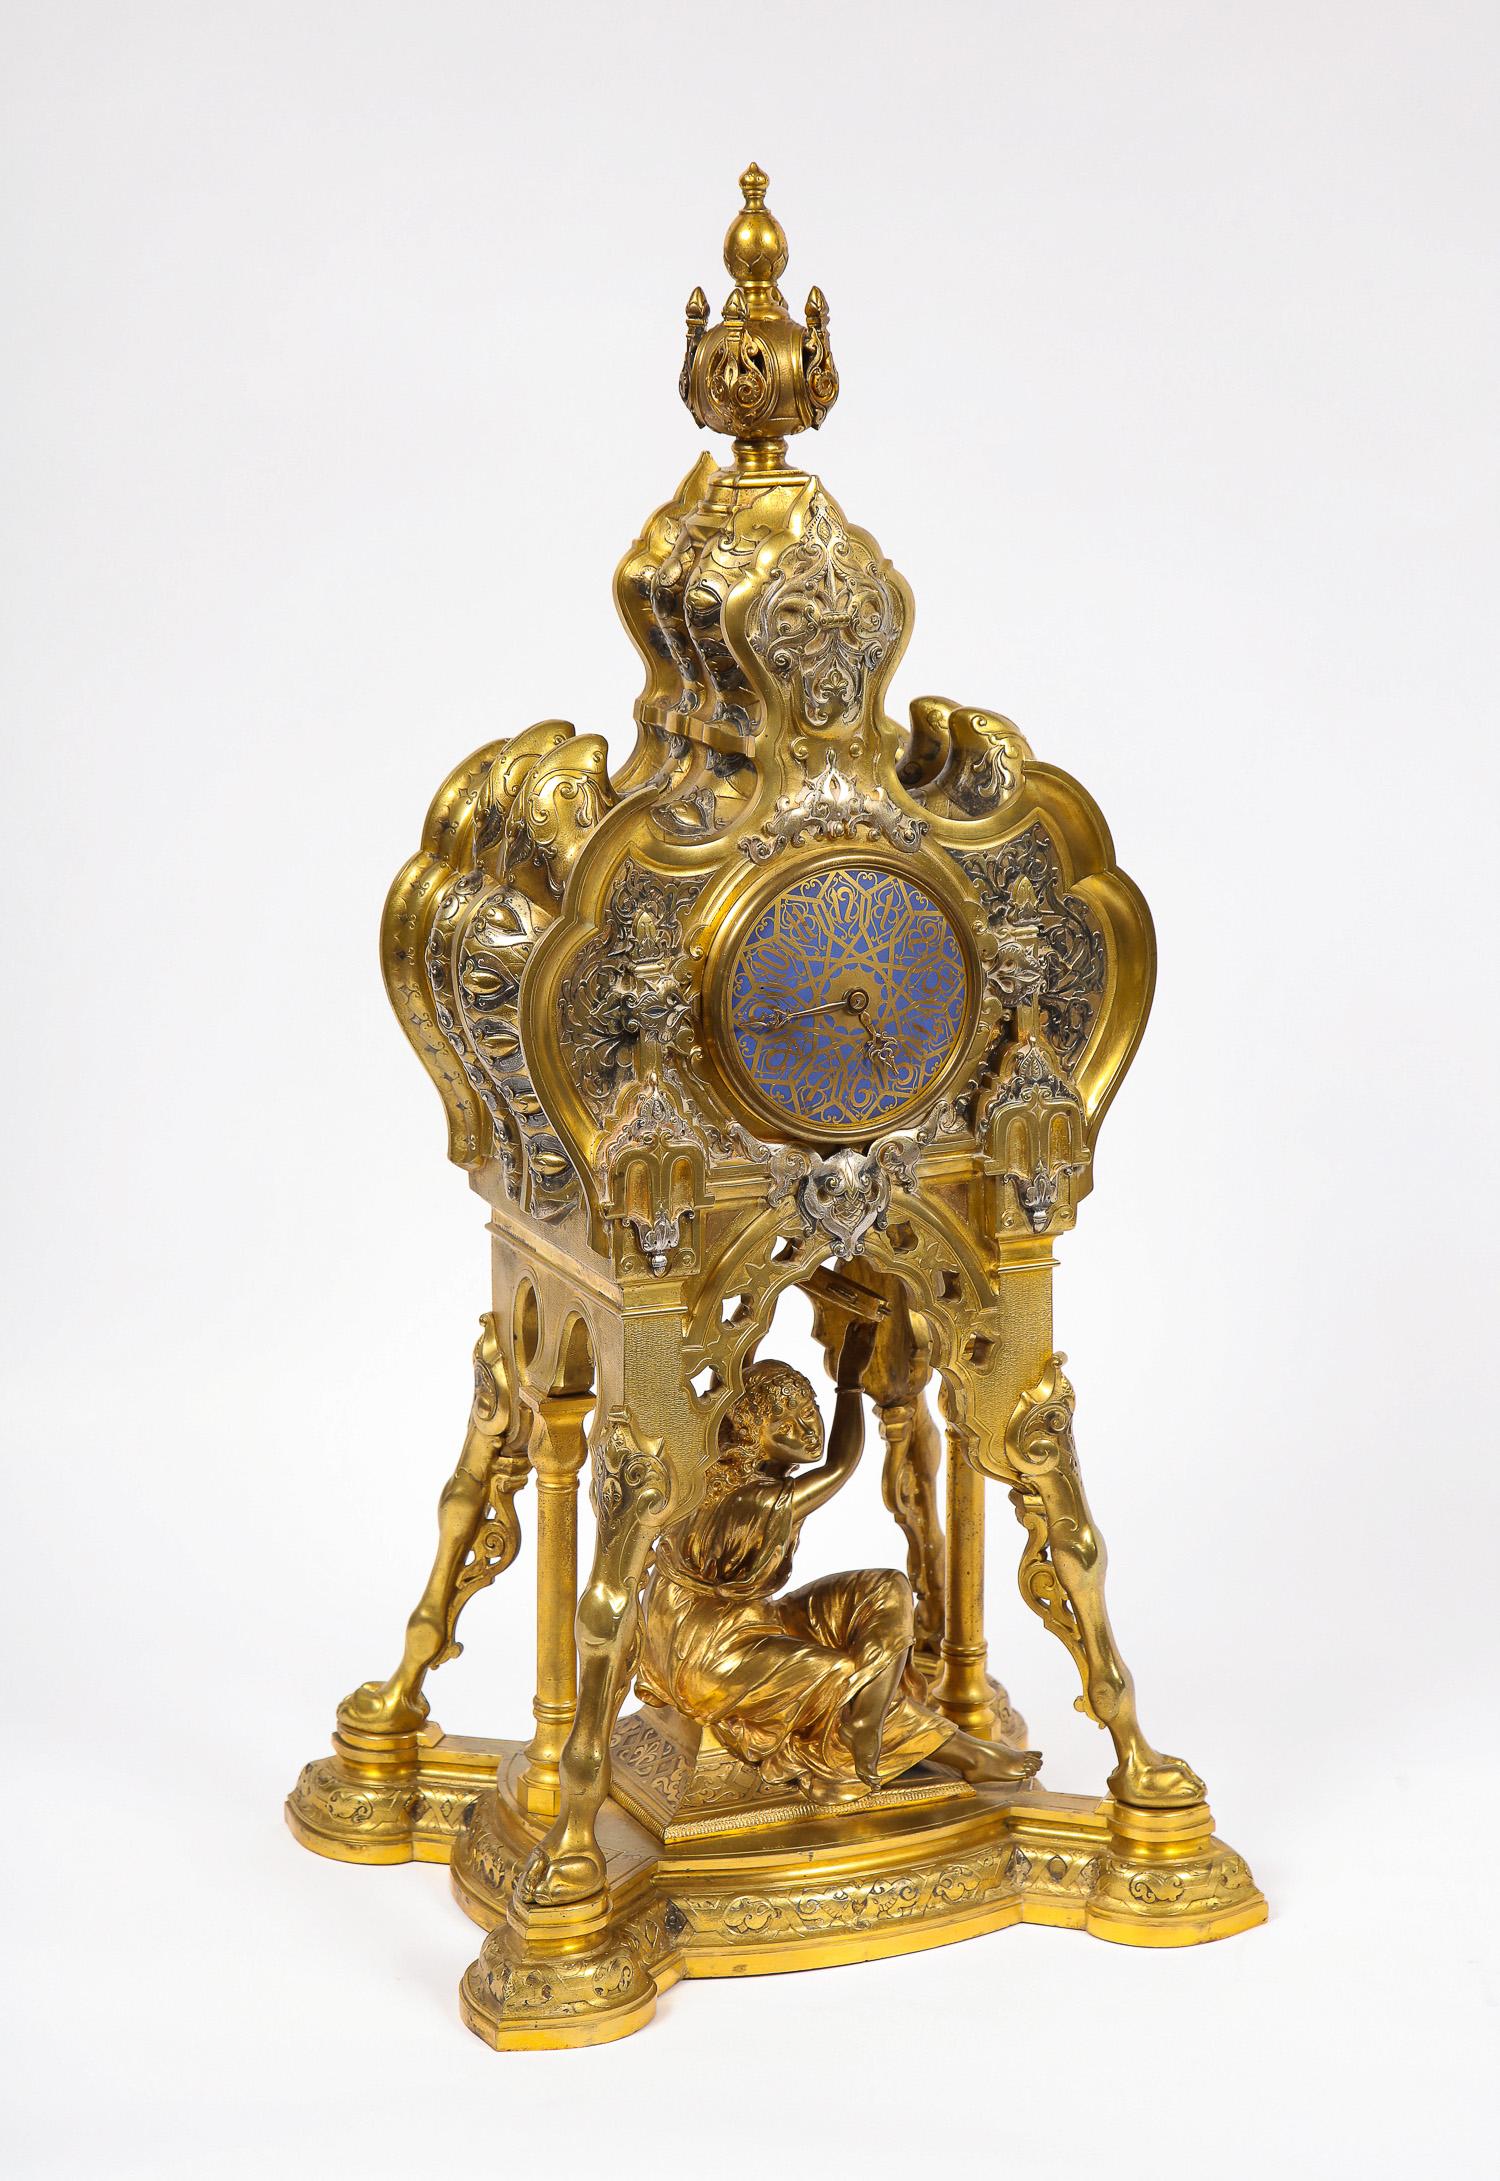 A very unusual 19th century antique French orientalist/Moorish silvered bronze, gilt bronze and champleve enamel figural clock, signed Boulez, marks on movement ROBLIN & FILS FRERES, A Paris, 32499. Found in the middle of the clock is a seated